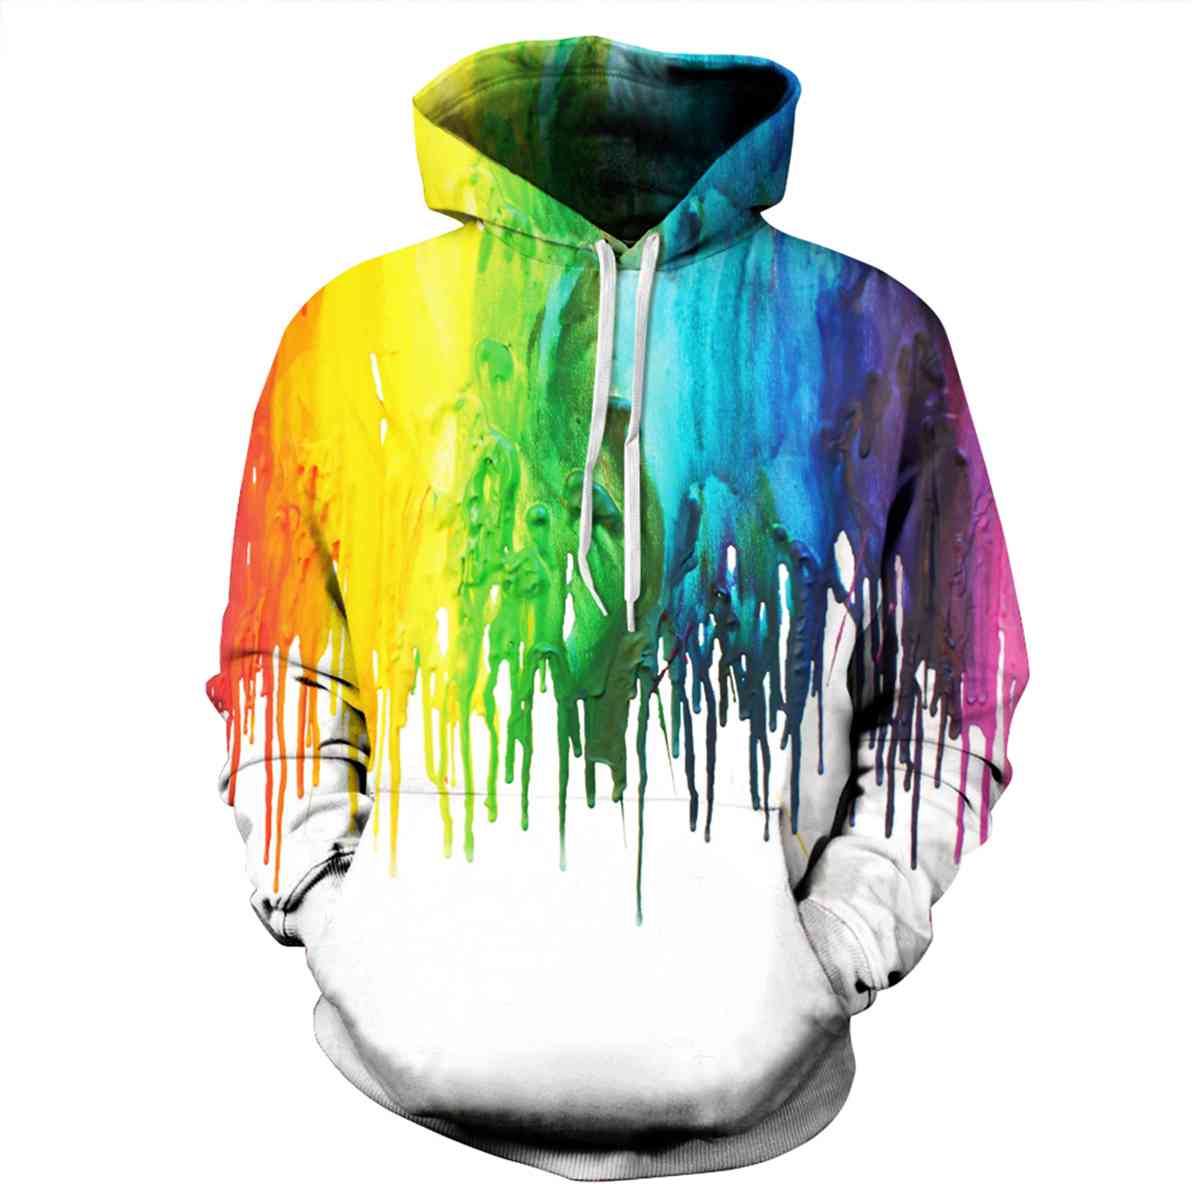 Full Size Printed Drawstring Hoodie with Pockets